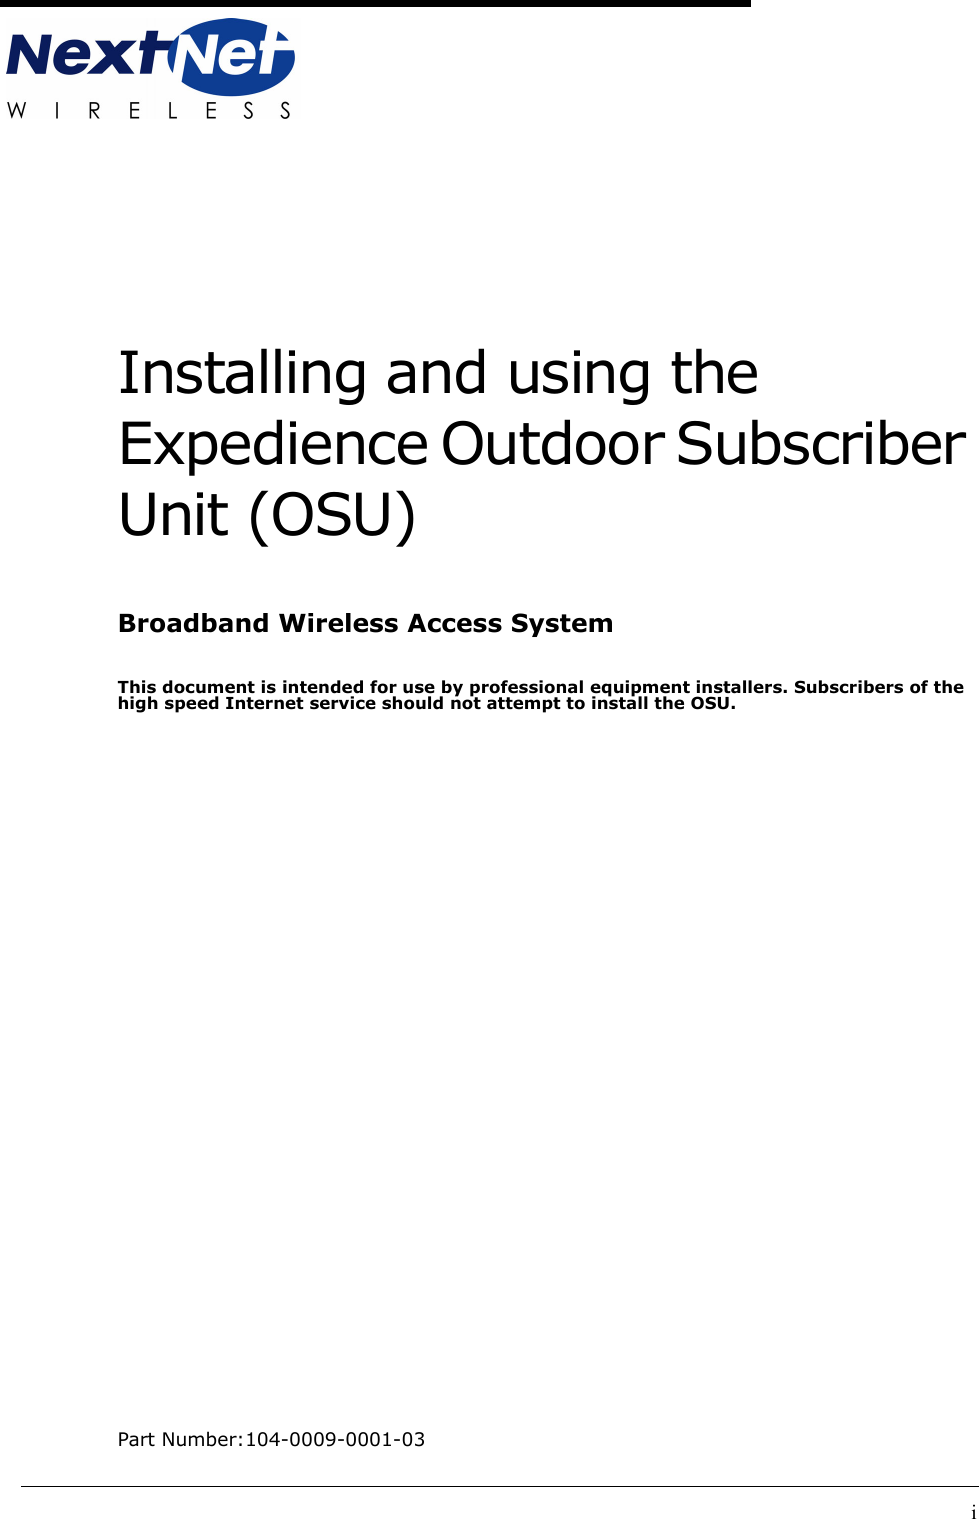 iInstalling and using the Expedience Outdoor Subscriber Unit (OSU)Broadband Wireless Access SystemThis document is intended for use by professional equipment installers. Subscribers of the high speed Internet service should not attempt to install the OSU.Part Number:104-0009-0001-03